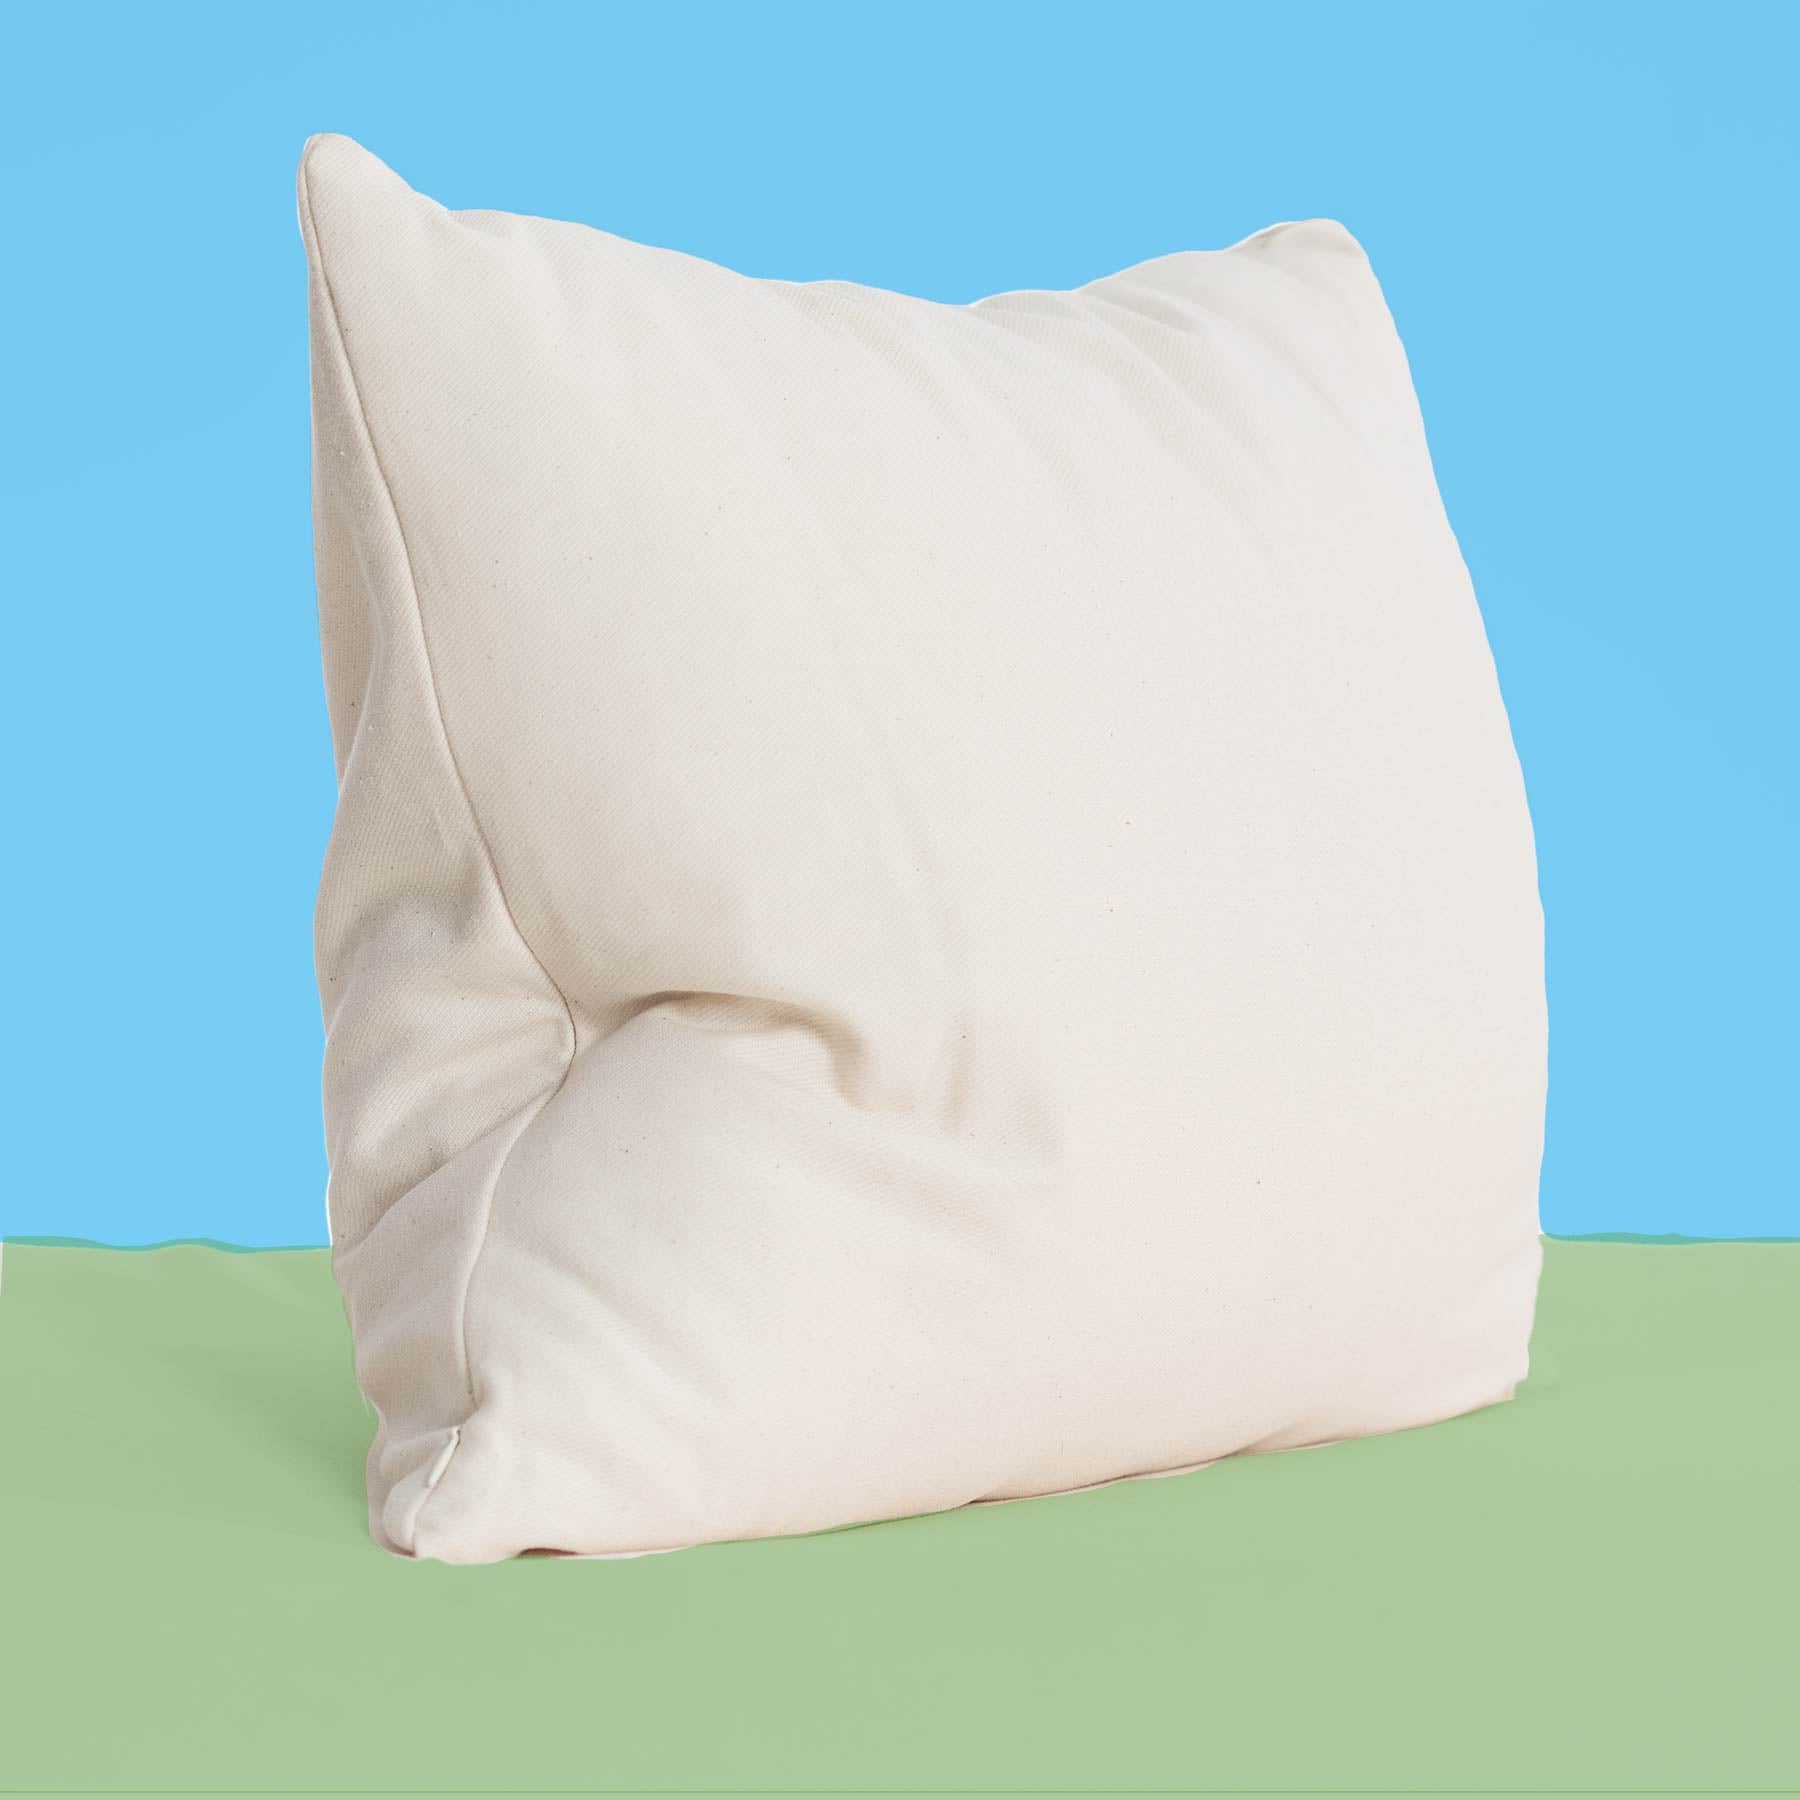 Crotch Pillows & Cushions for Sale